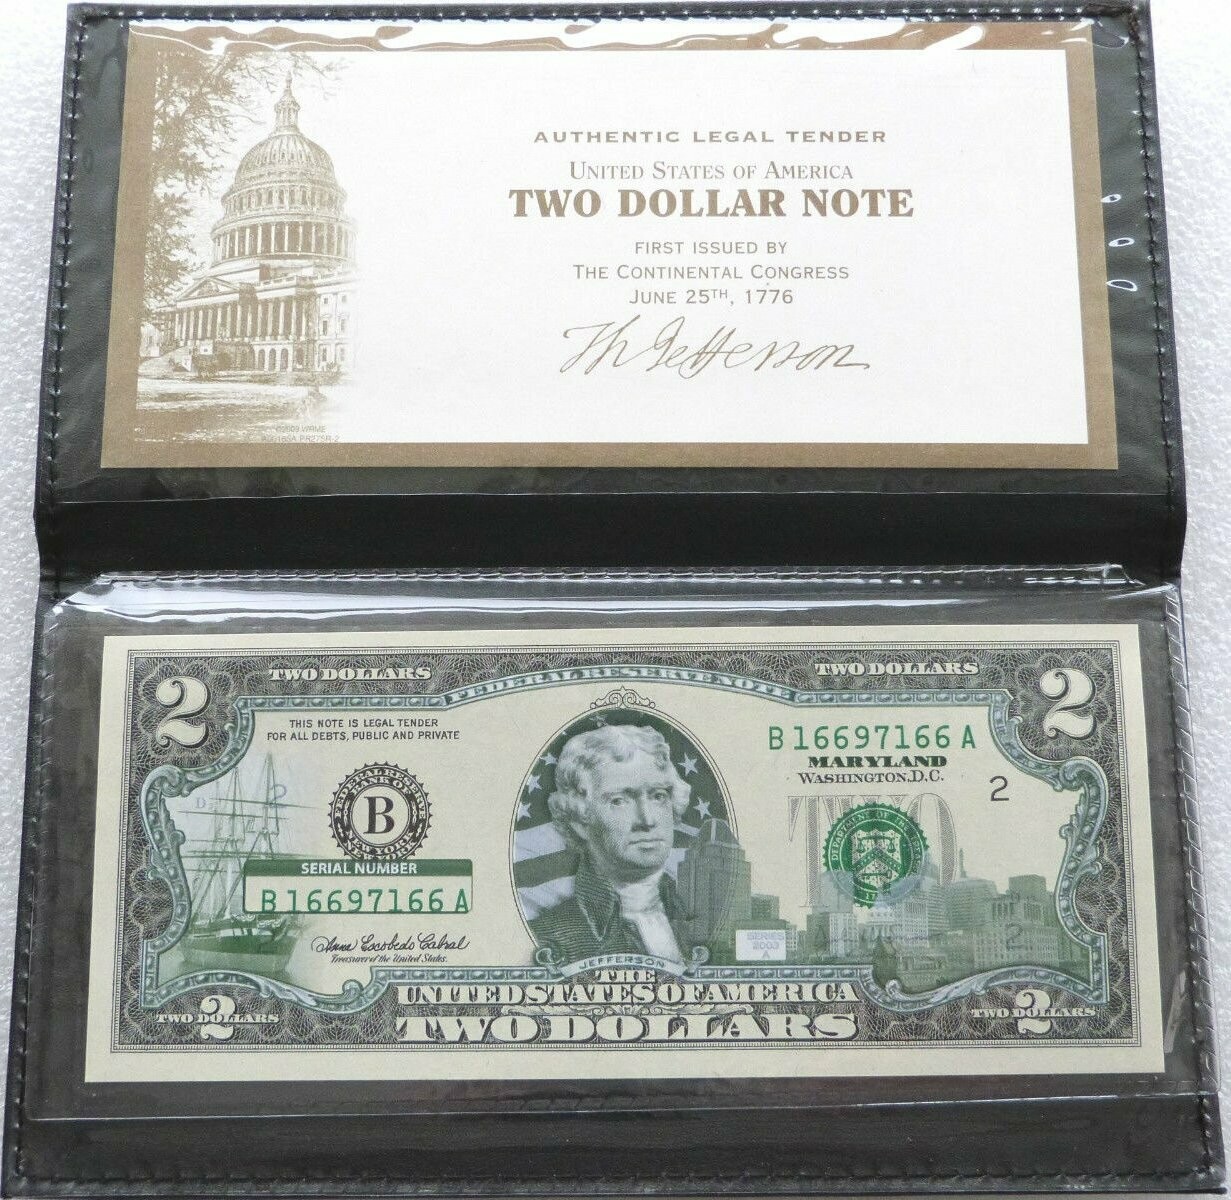 Paper Money US *Federal Reserve Note *2 Dollar Bill *Two Dollar Stamps *Banknote Currency *Gem Unc *Business Collection Gifts *Burundi Flag